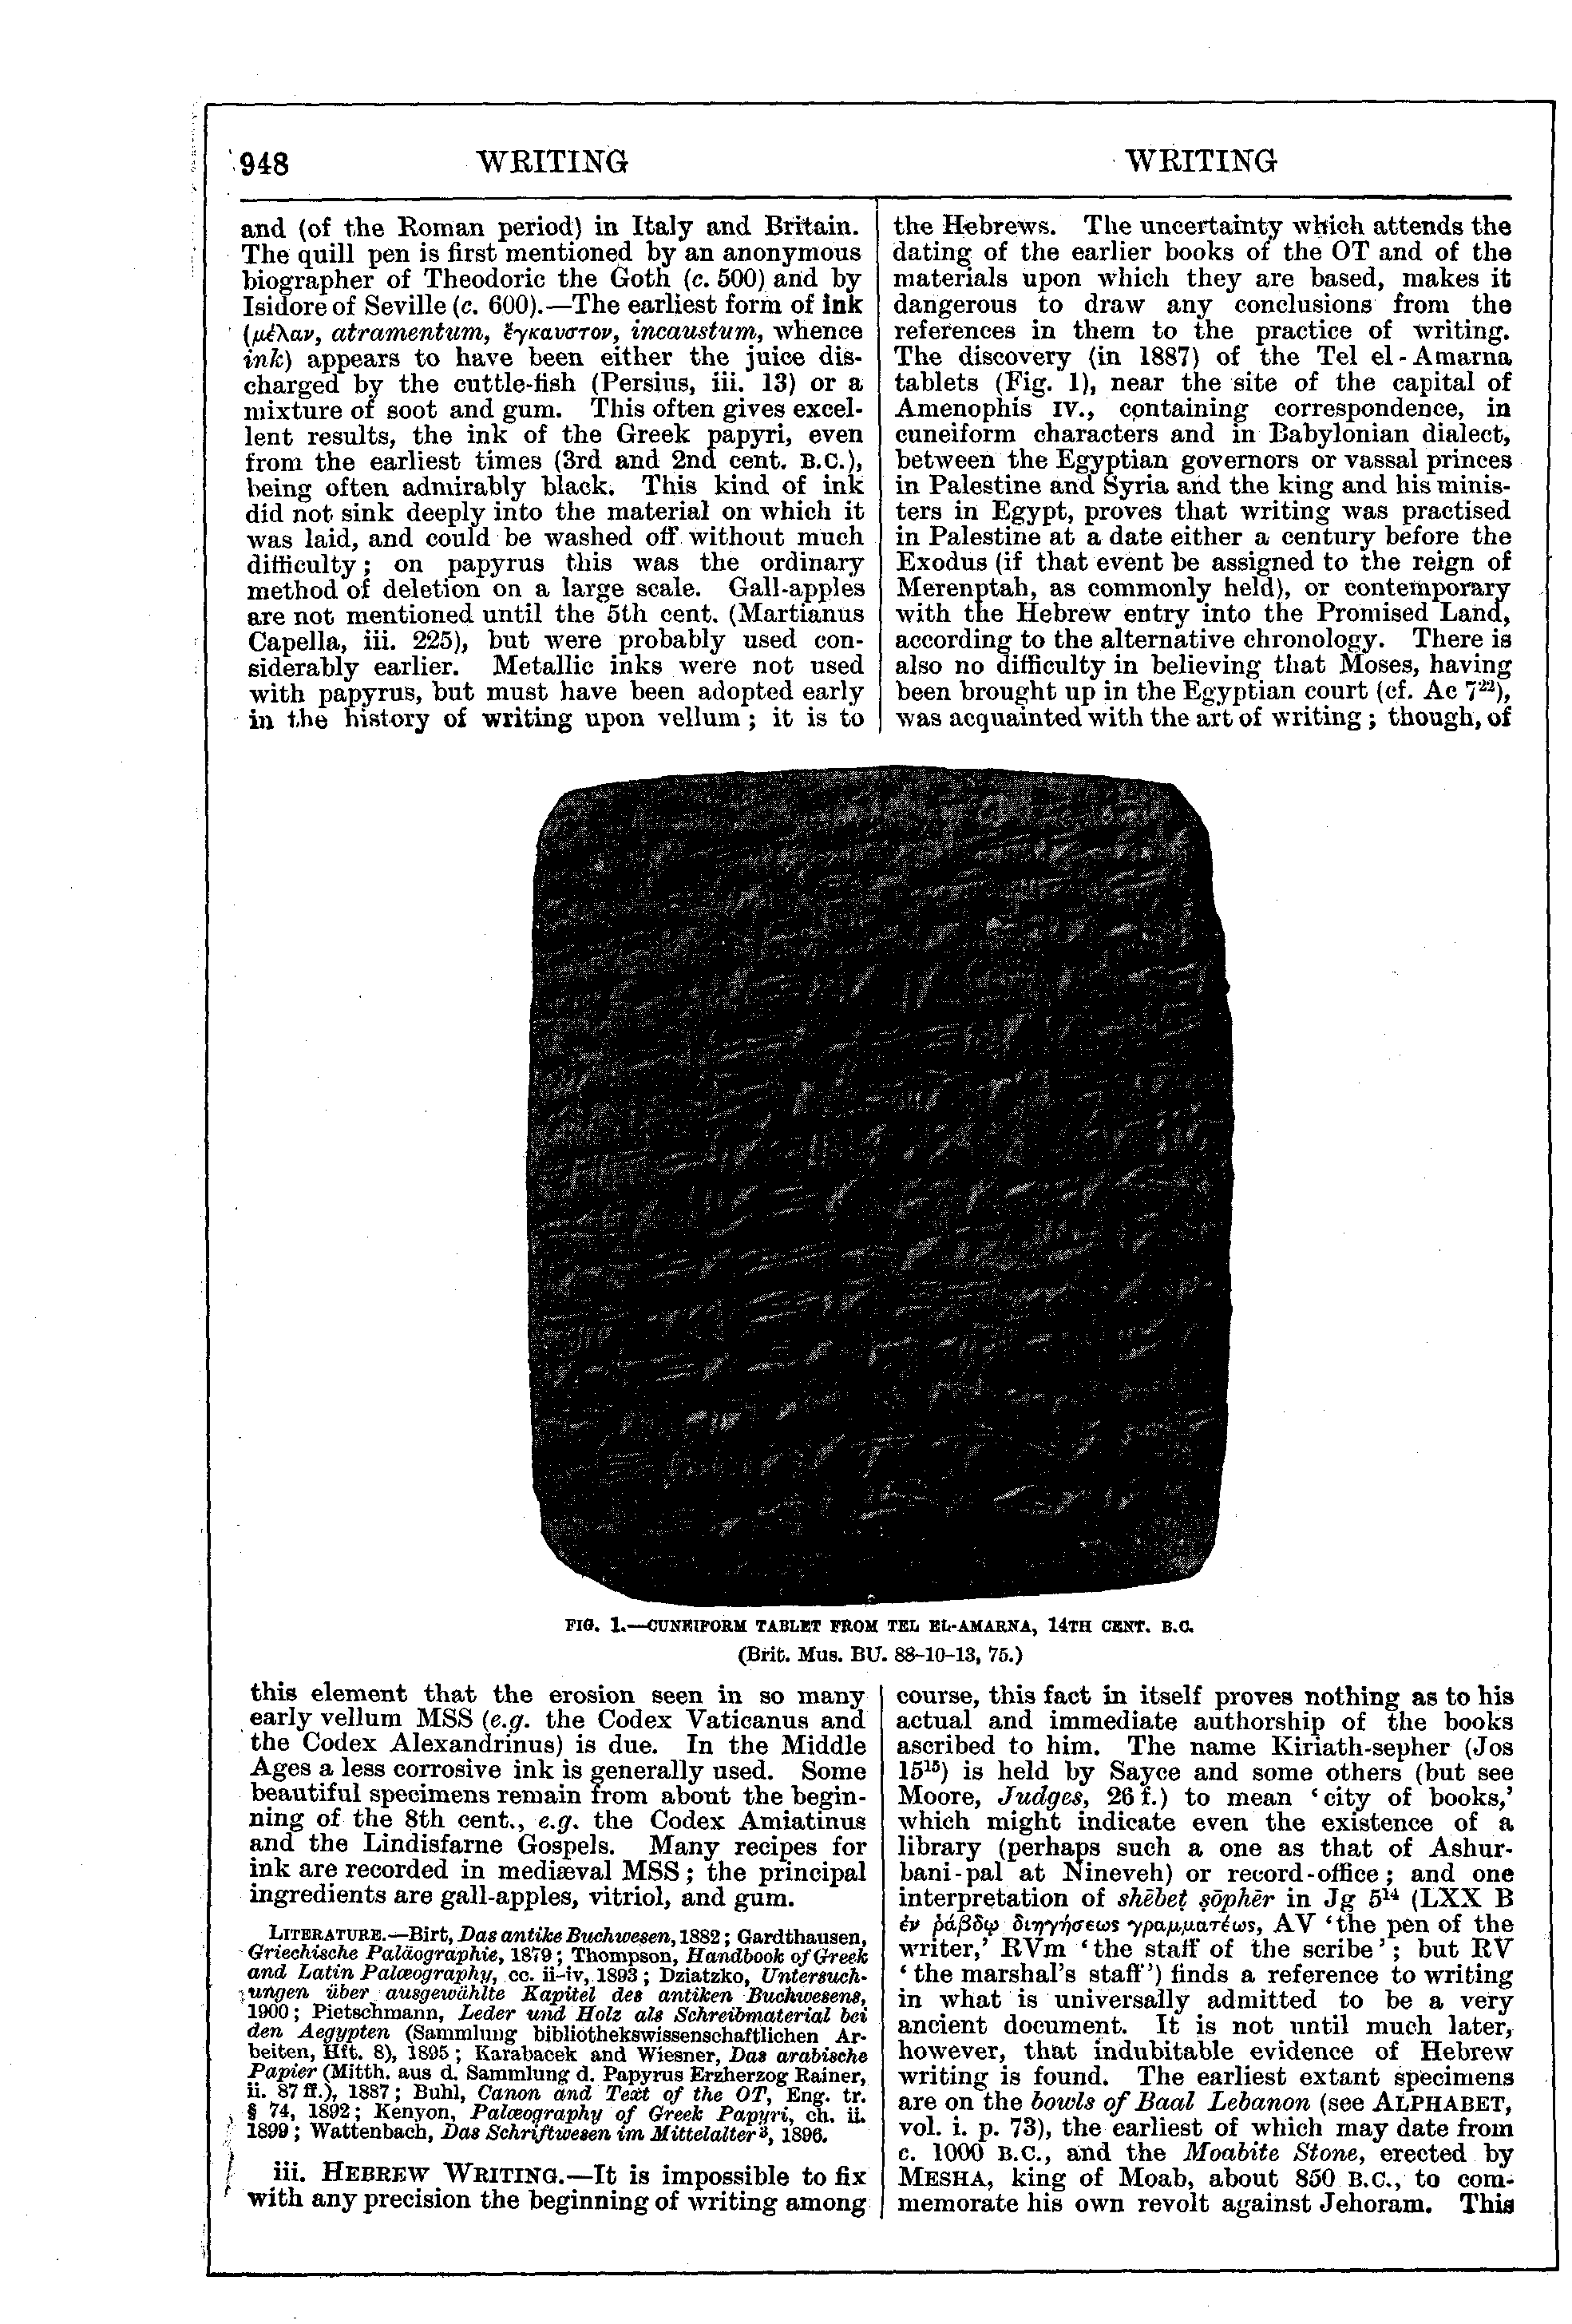 Image of page 948